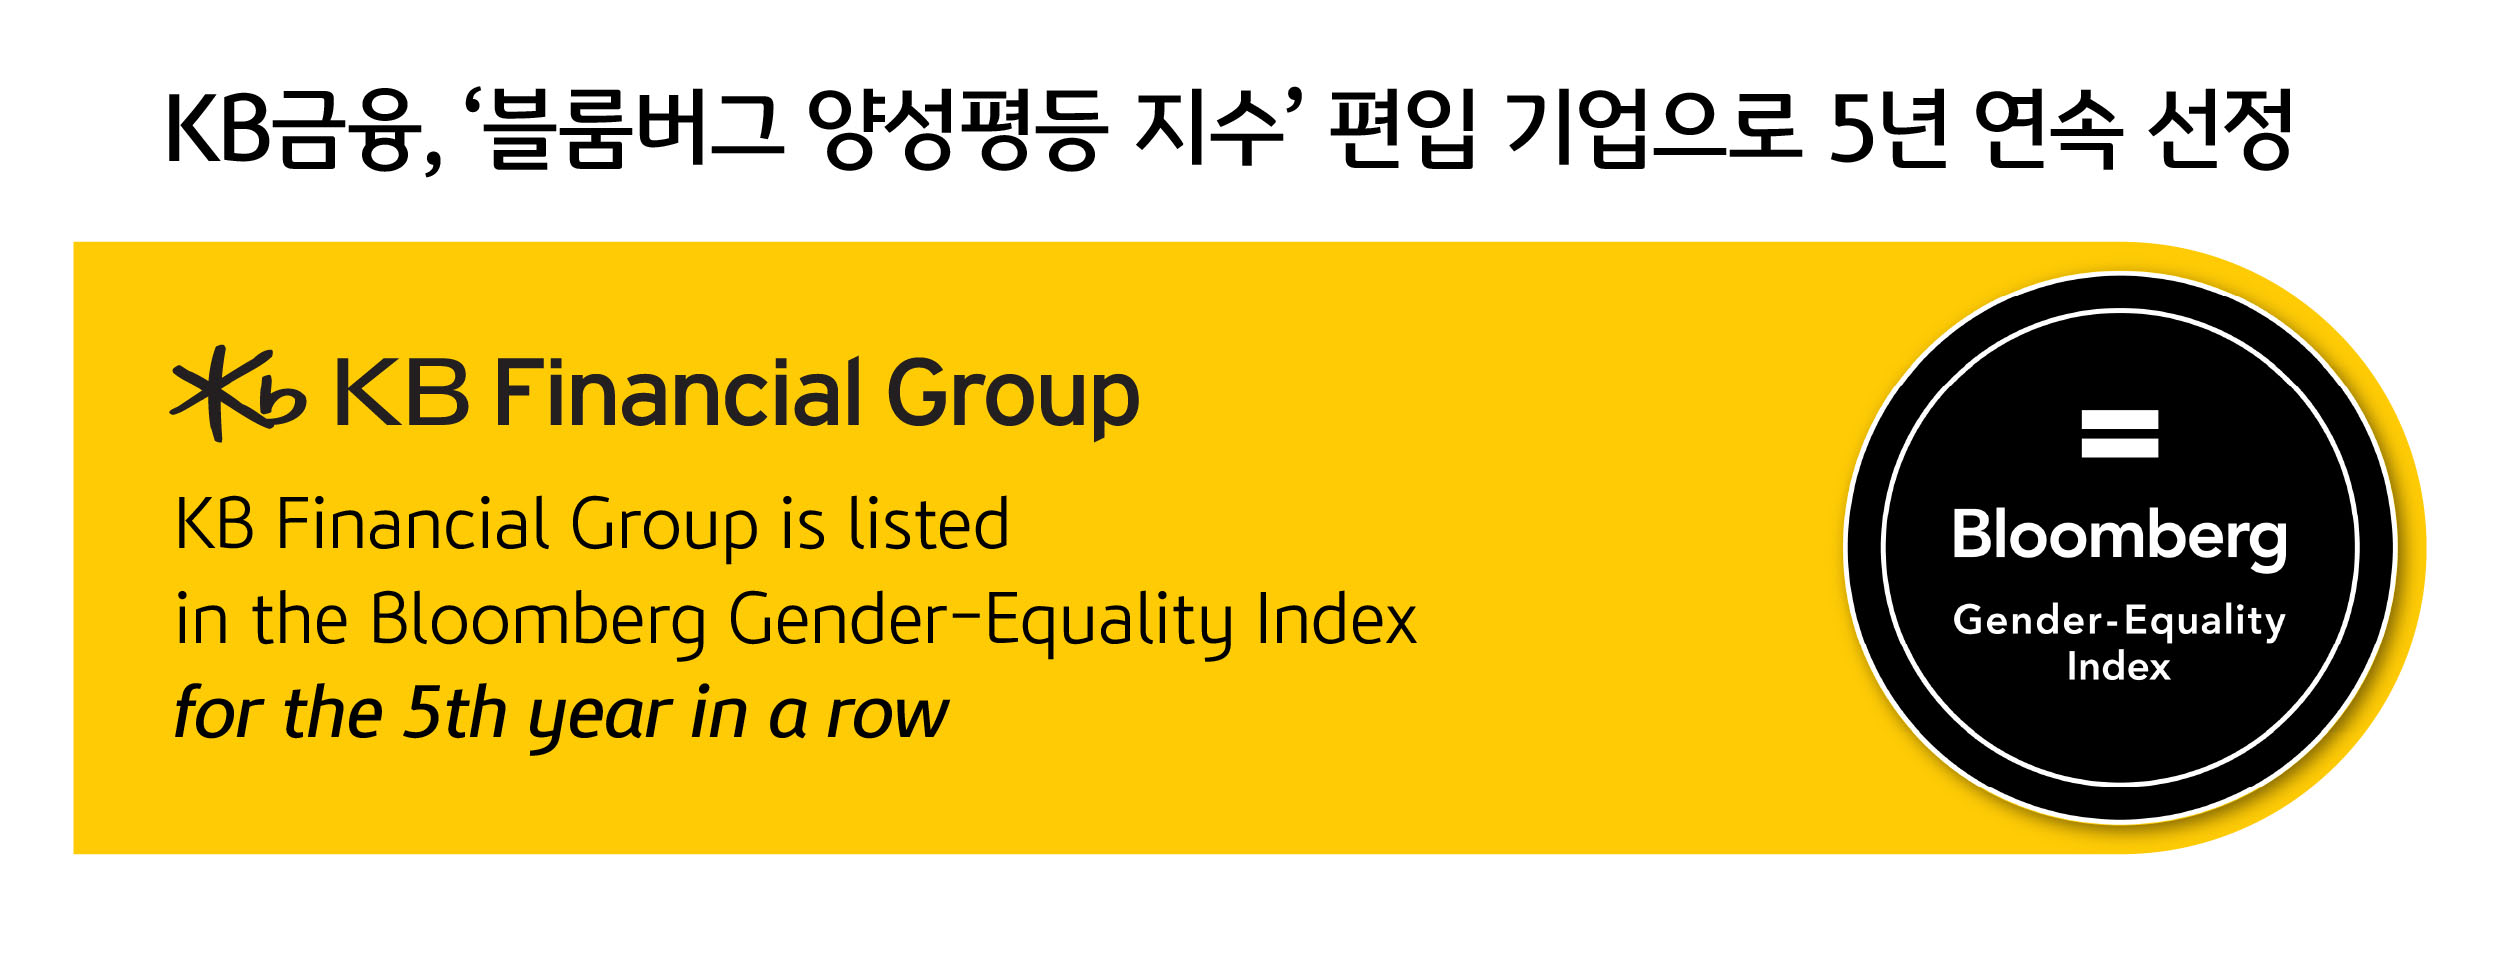 The image of winning the Bloomberg Gender Equality Index for the fifth year in a row.